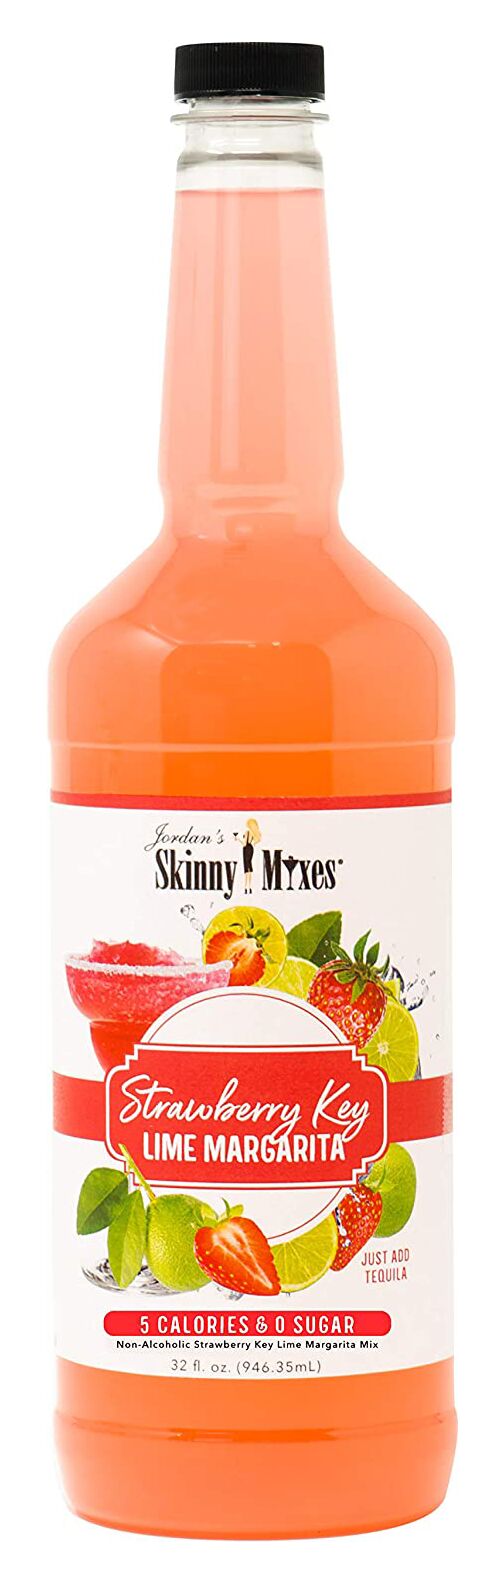 Skinny Cocktail Mixers Gift Set of 5